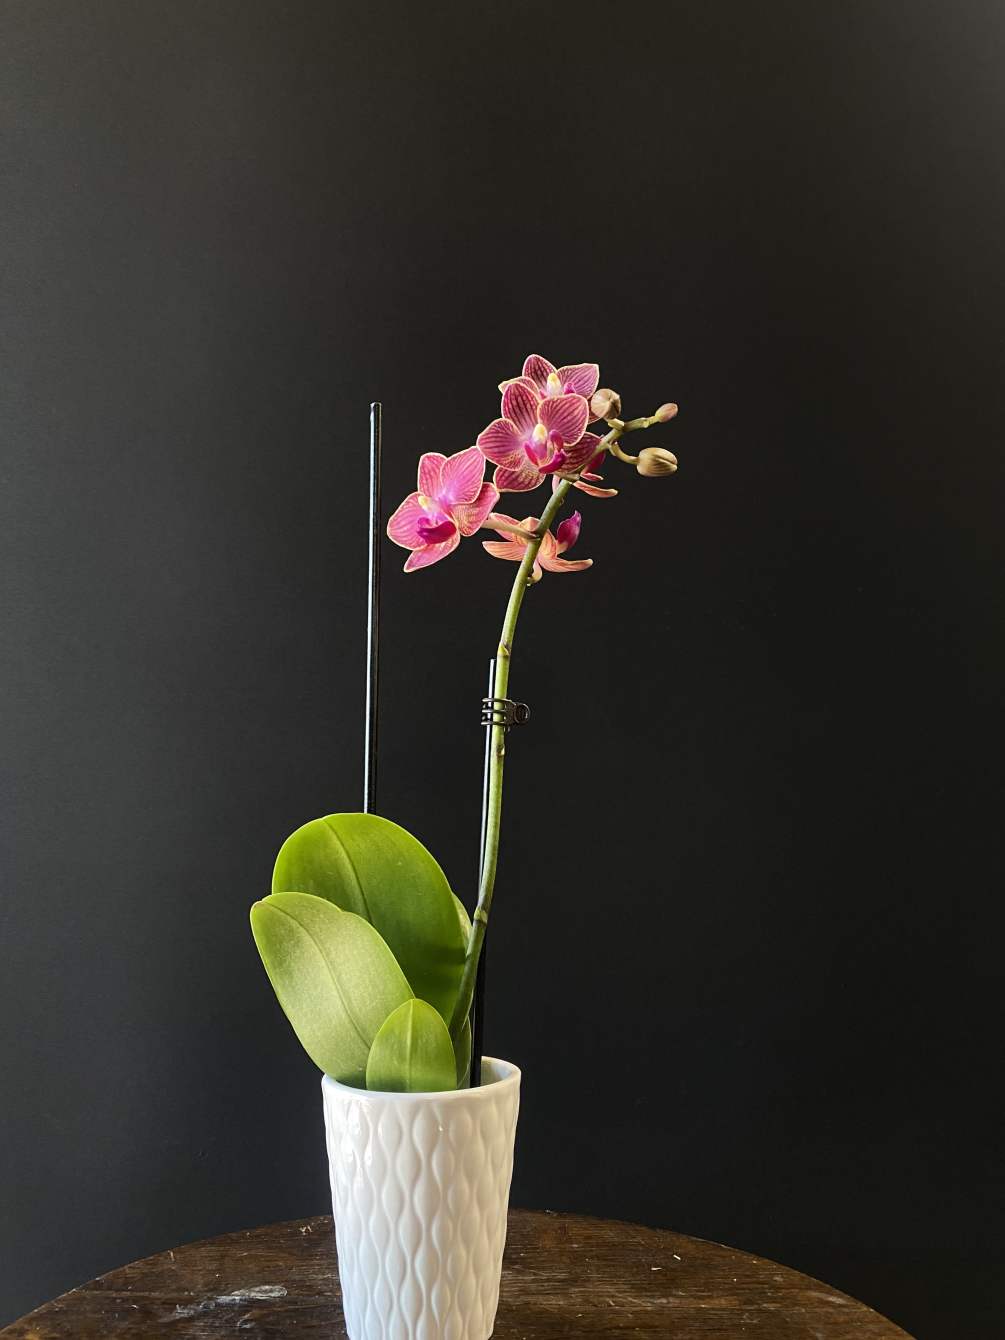 Mini orchids are a perfect gift for any occasion and are sure